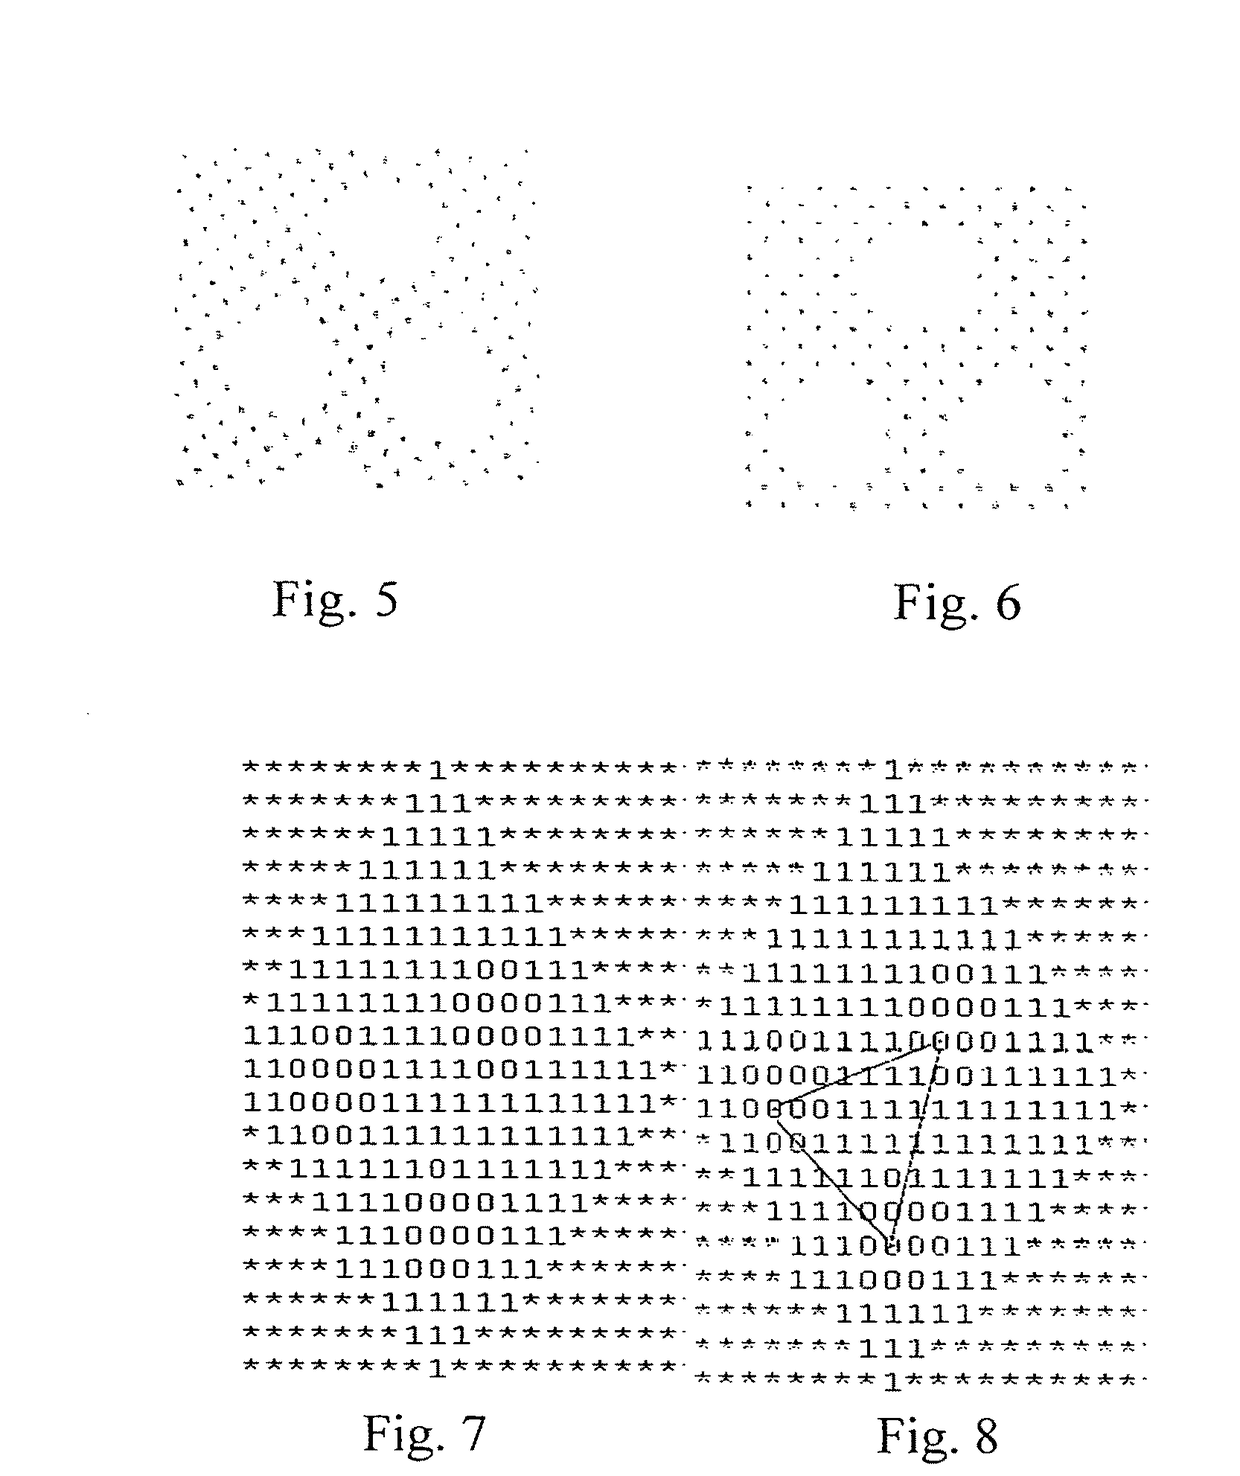 Method of document protection